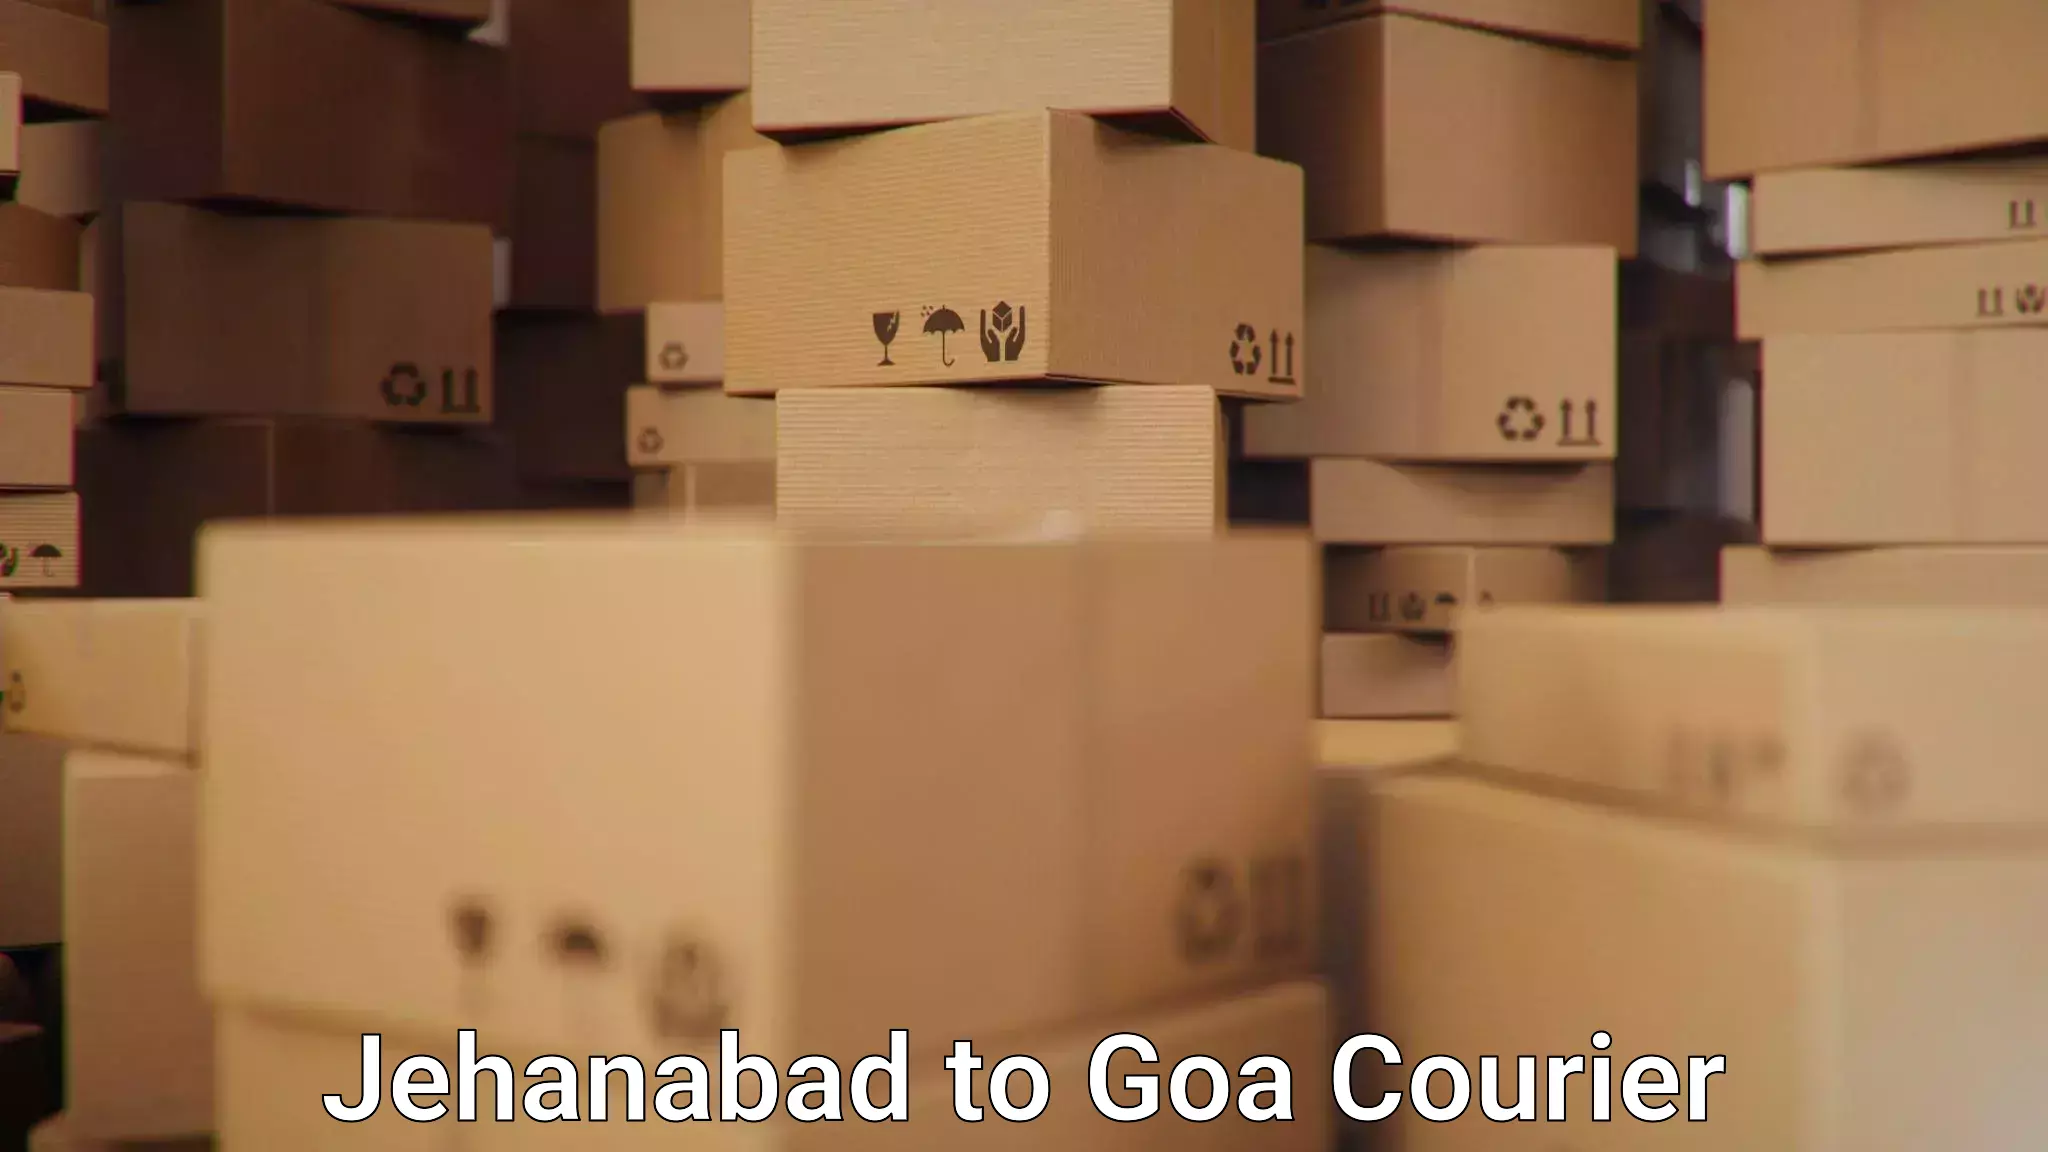 Courier service booking Jehanabad to Goa